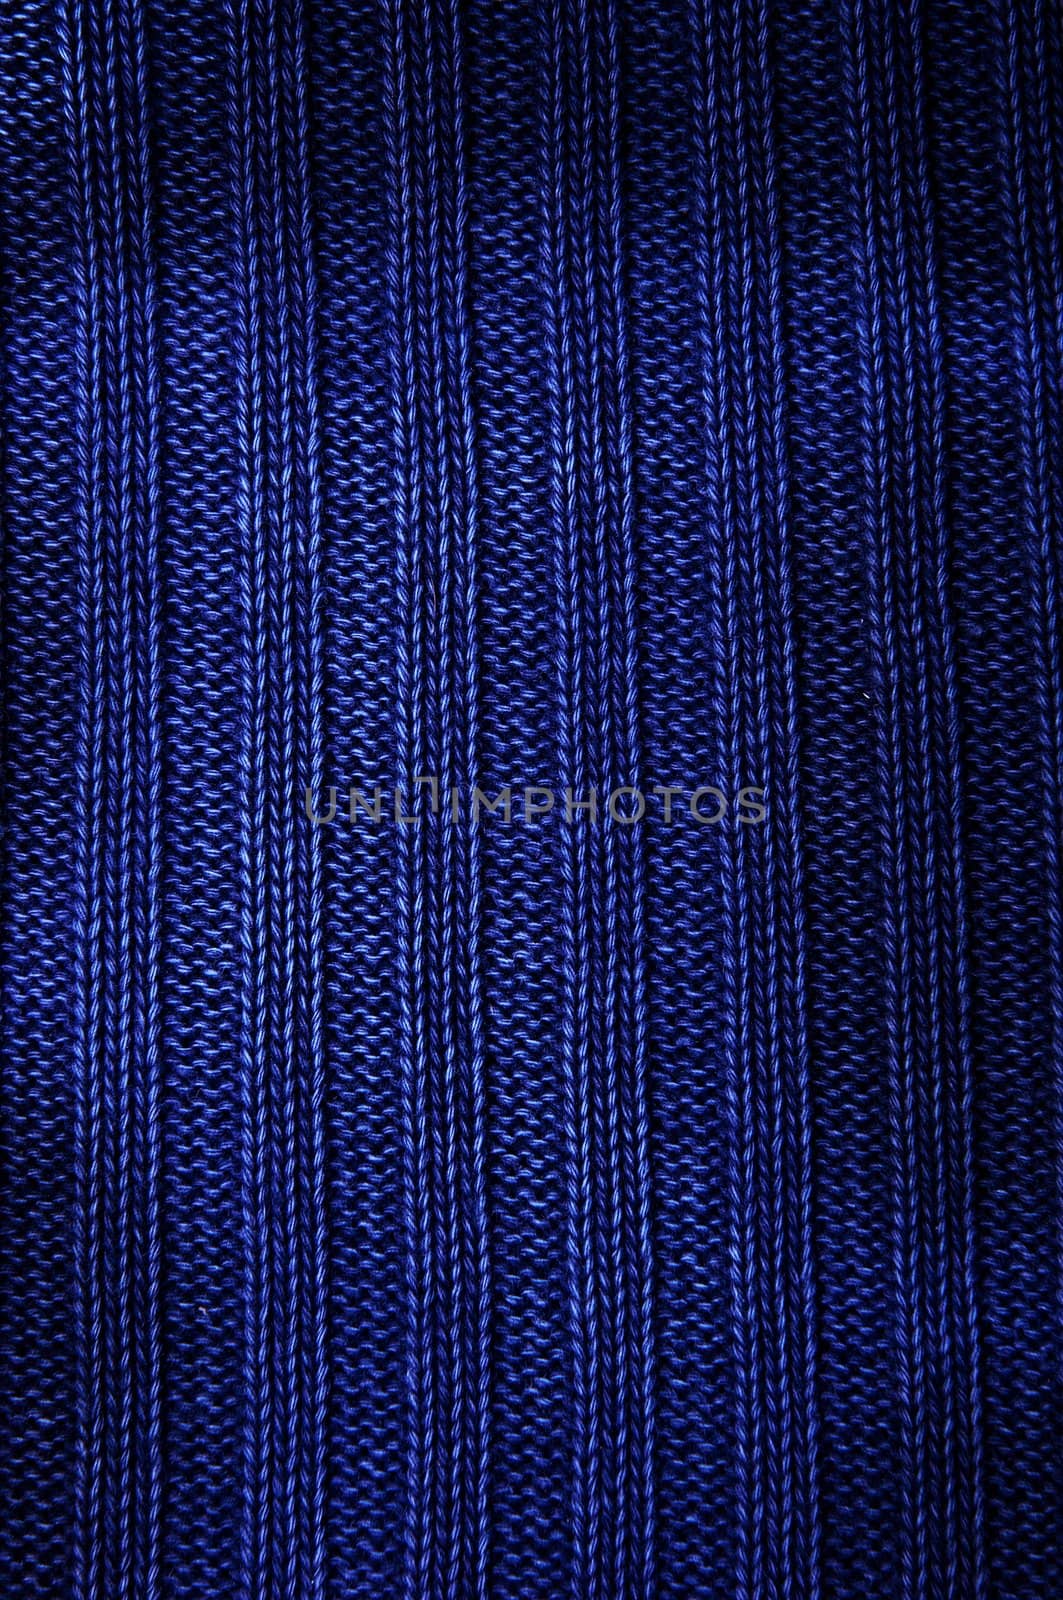 Background a texture a knitted fabric "elastic band" of dark blue color. Vertical